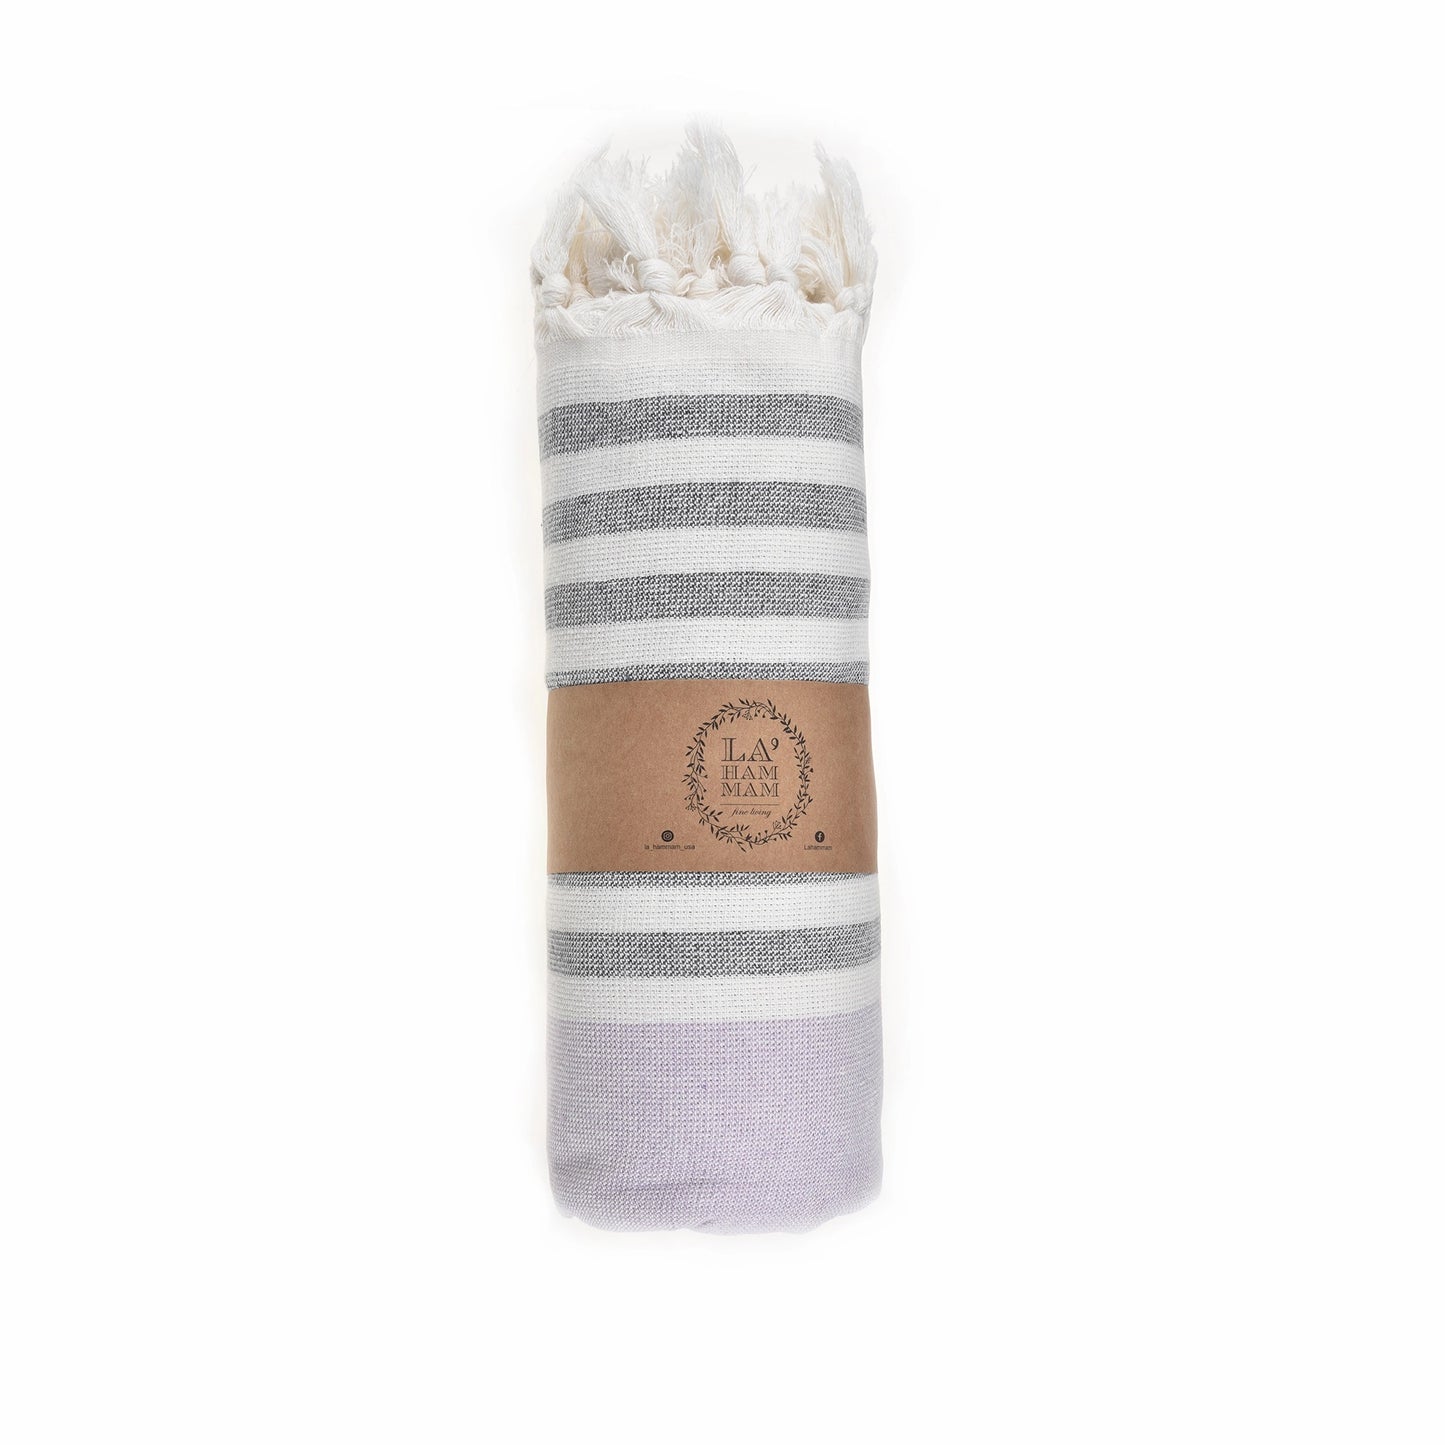 Turkish Towels - Terry Cloth on reverse